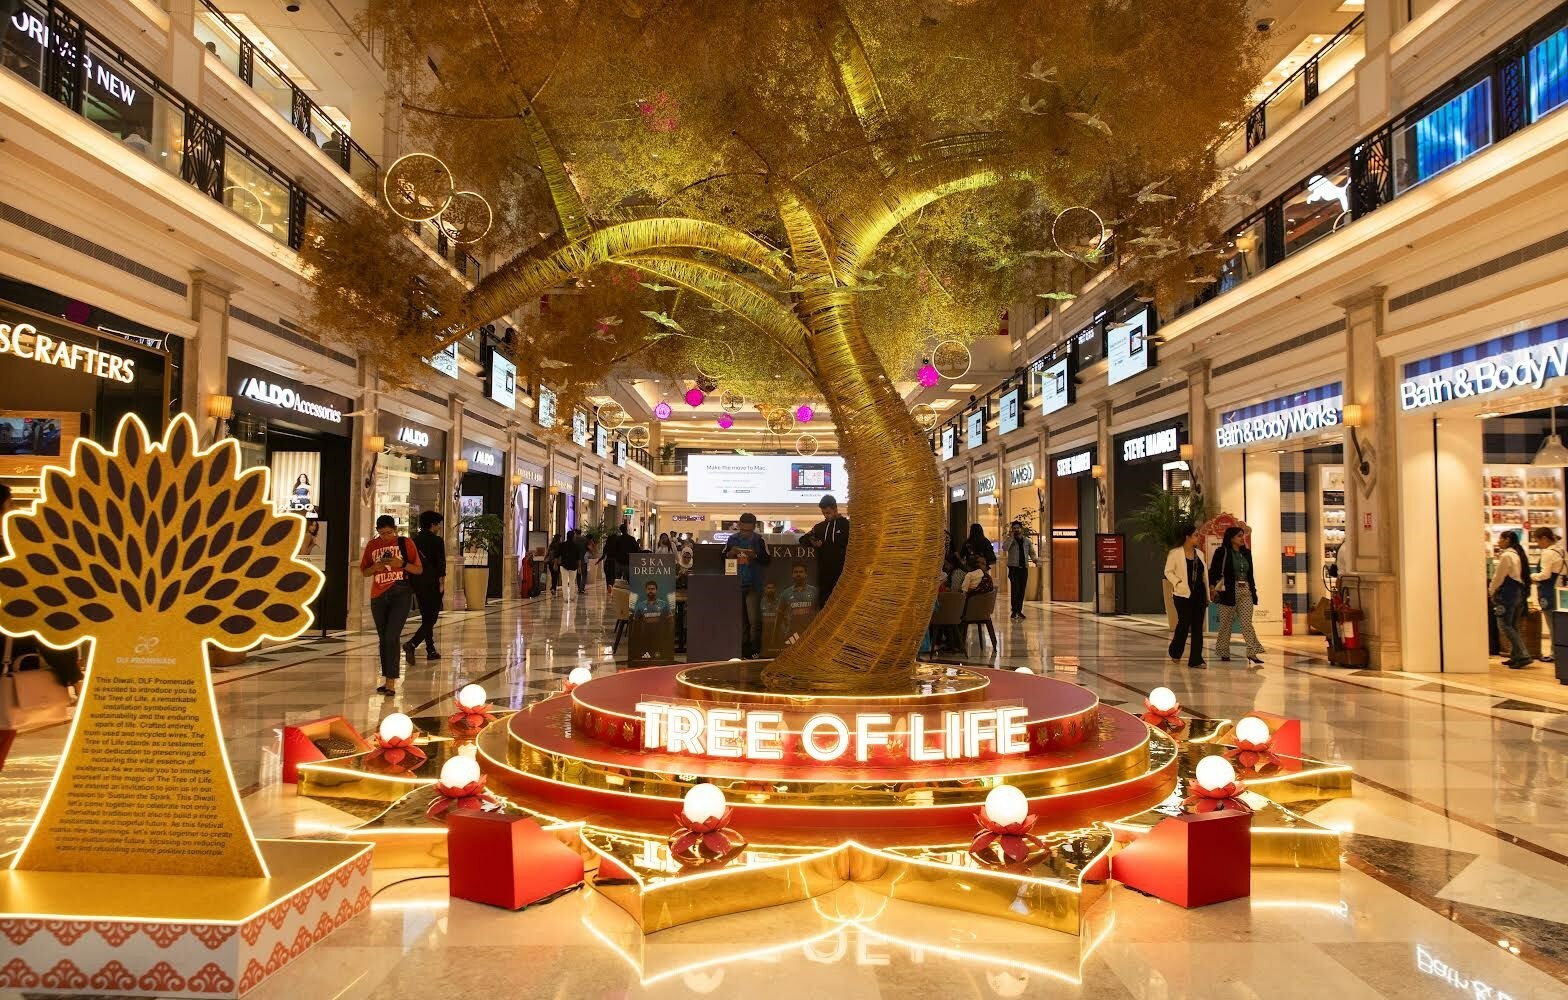 The Tree of Life, is a magnificent installation done by DLF Promenade this Diwali symbolizing sustainability